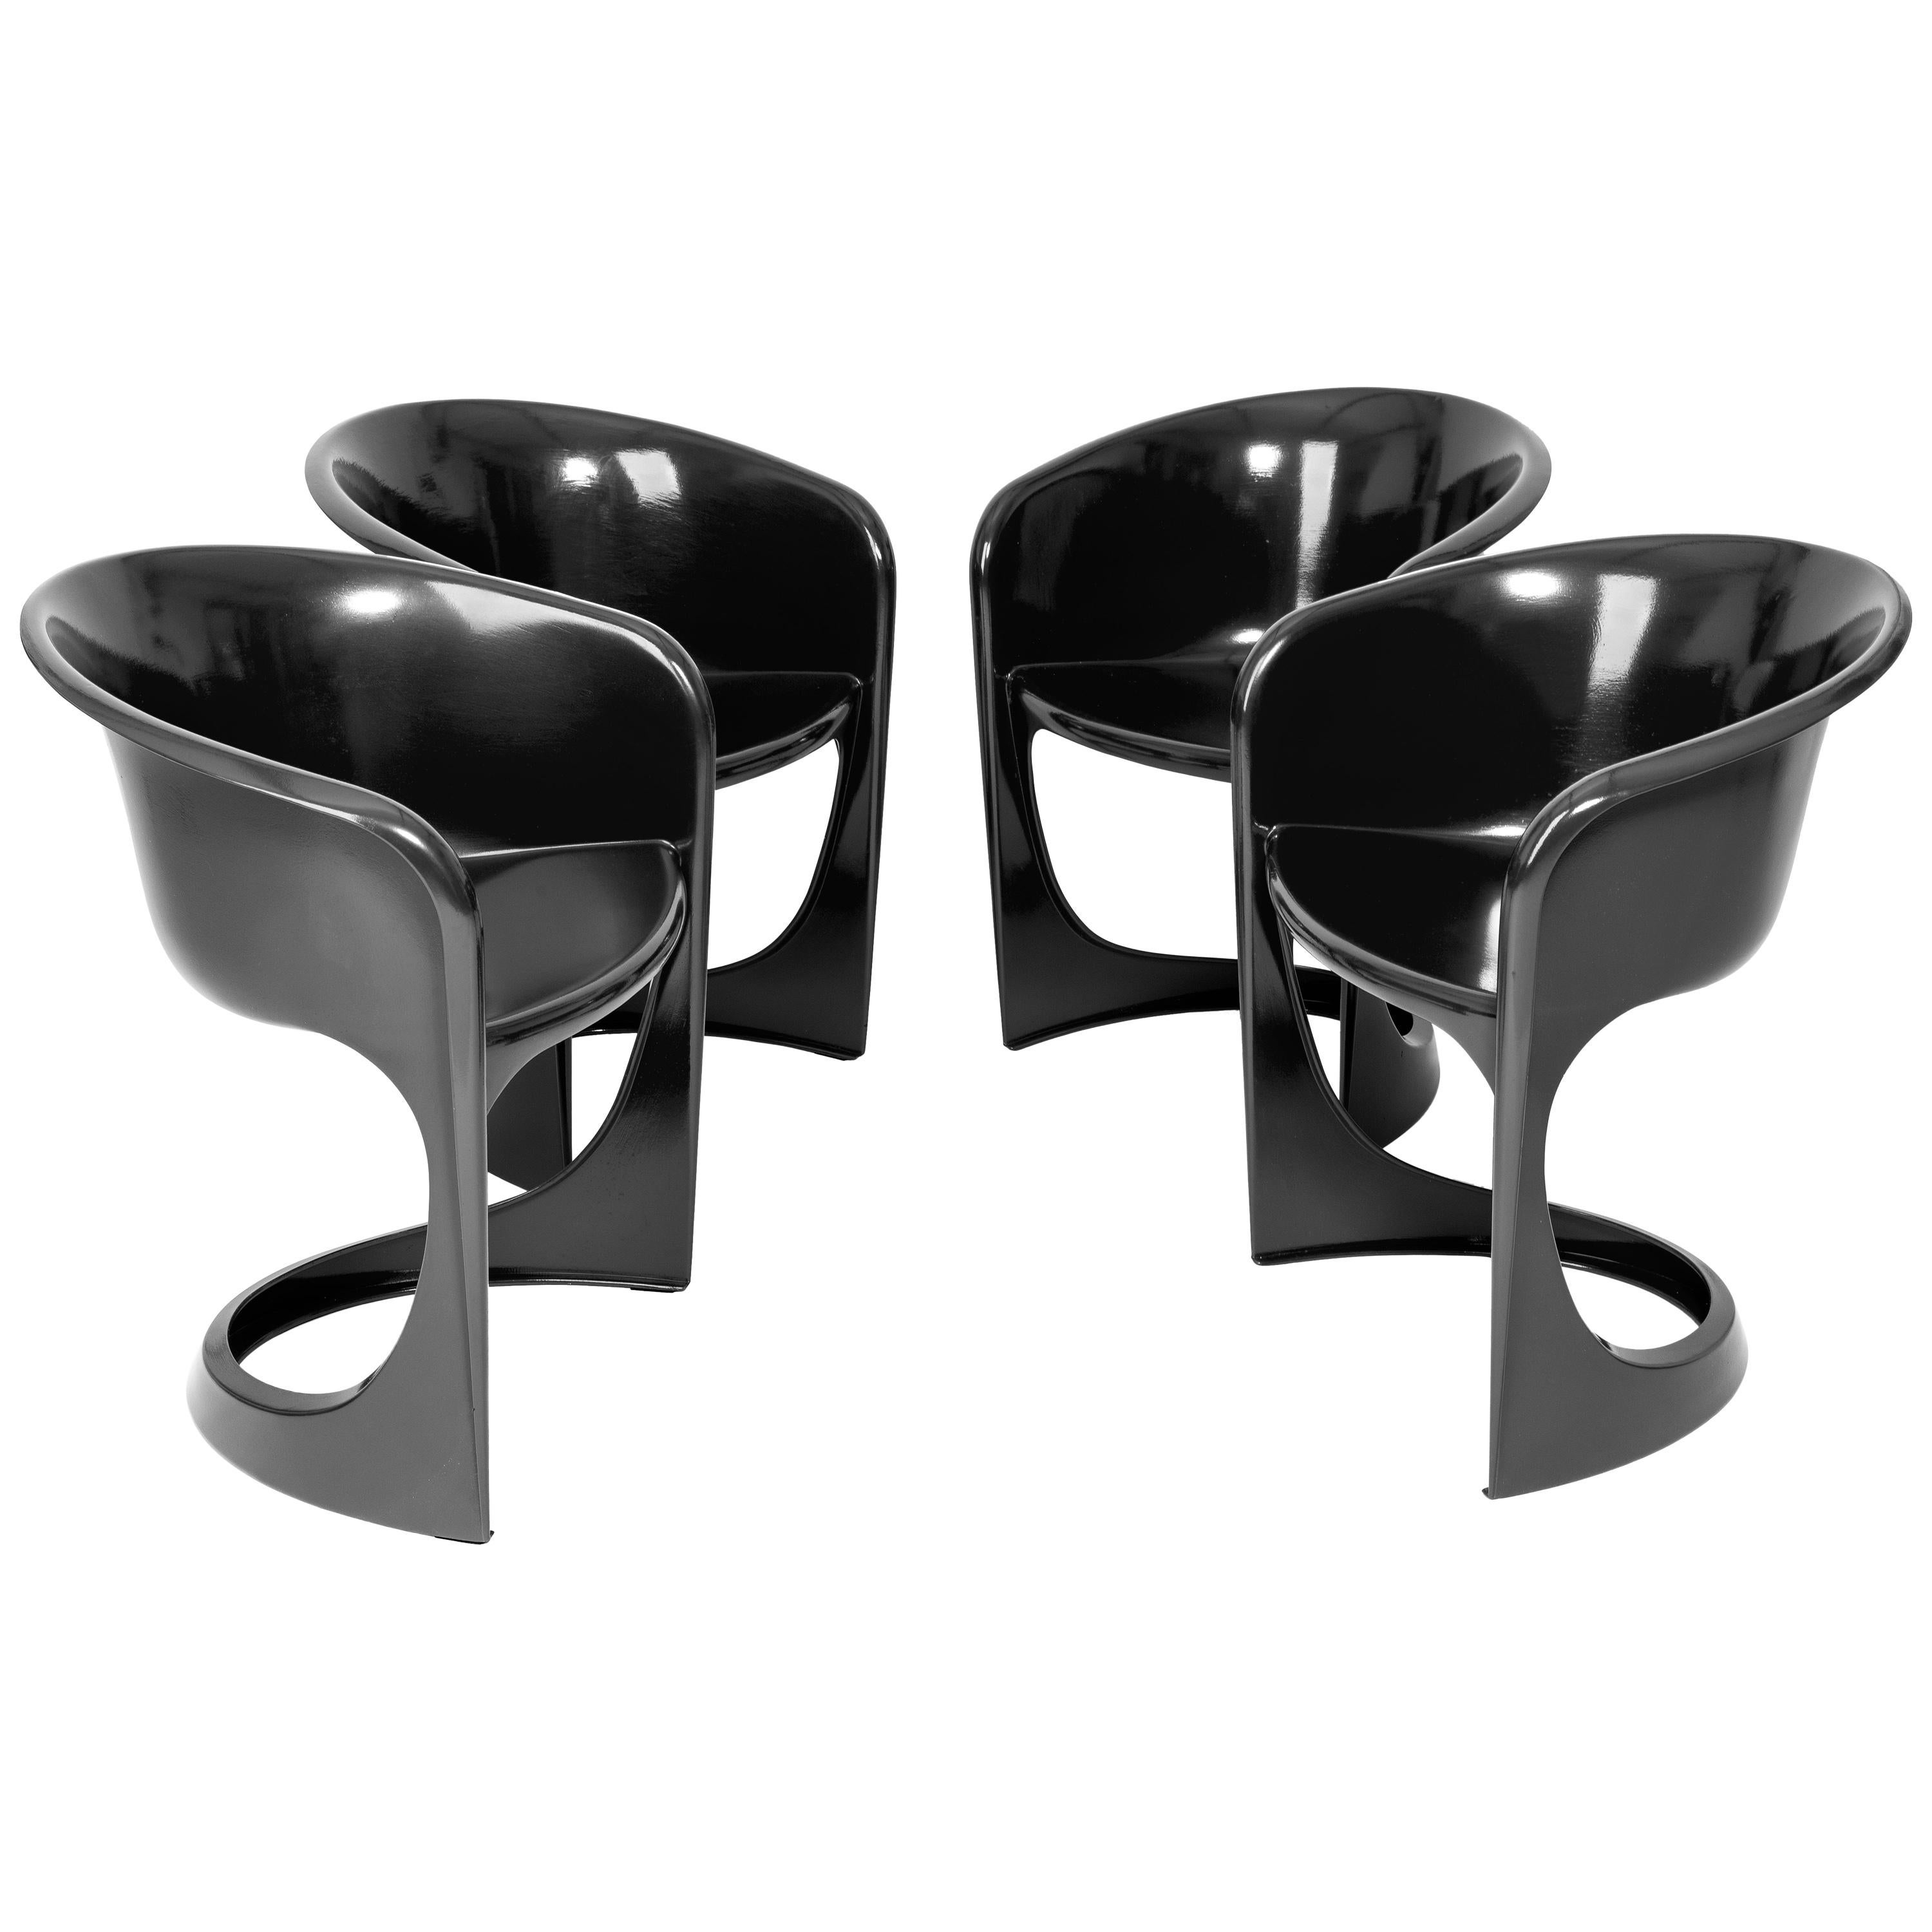 Set of Four Black Glossy Cado Chairs, Steen Østergaard, 1974